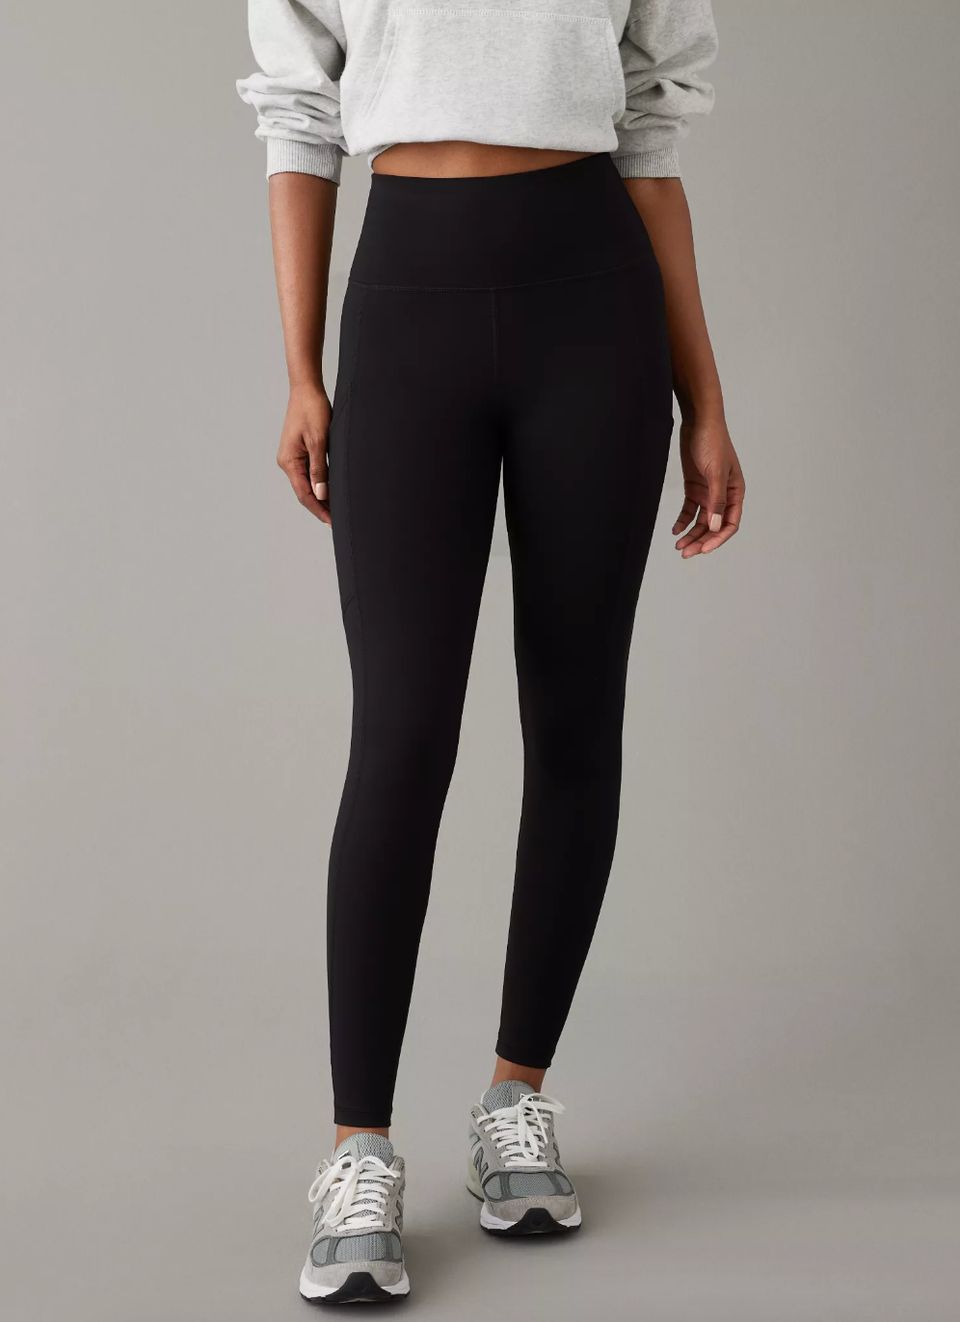 A pair of high-waisted "Everything" leggings that have earned their name